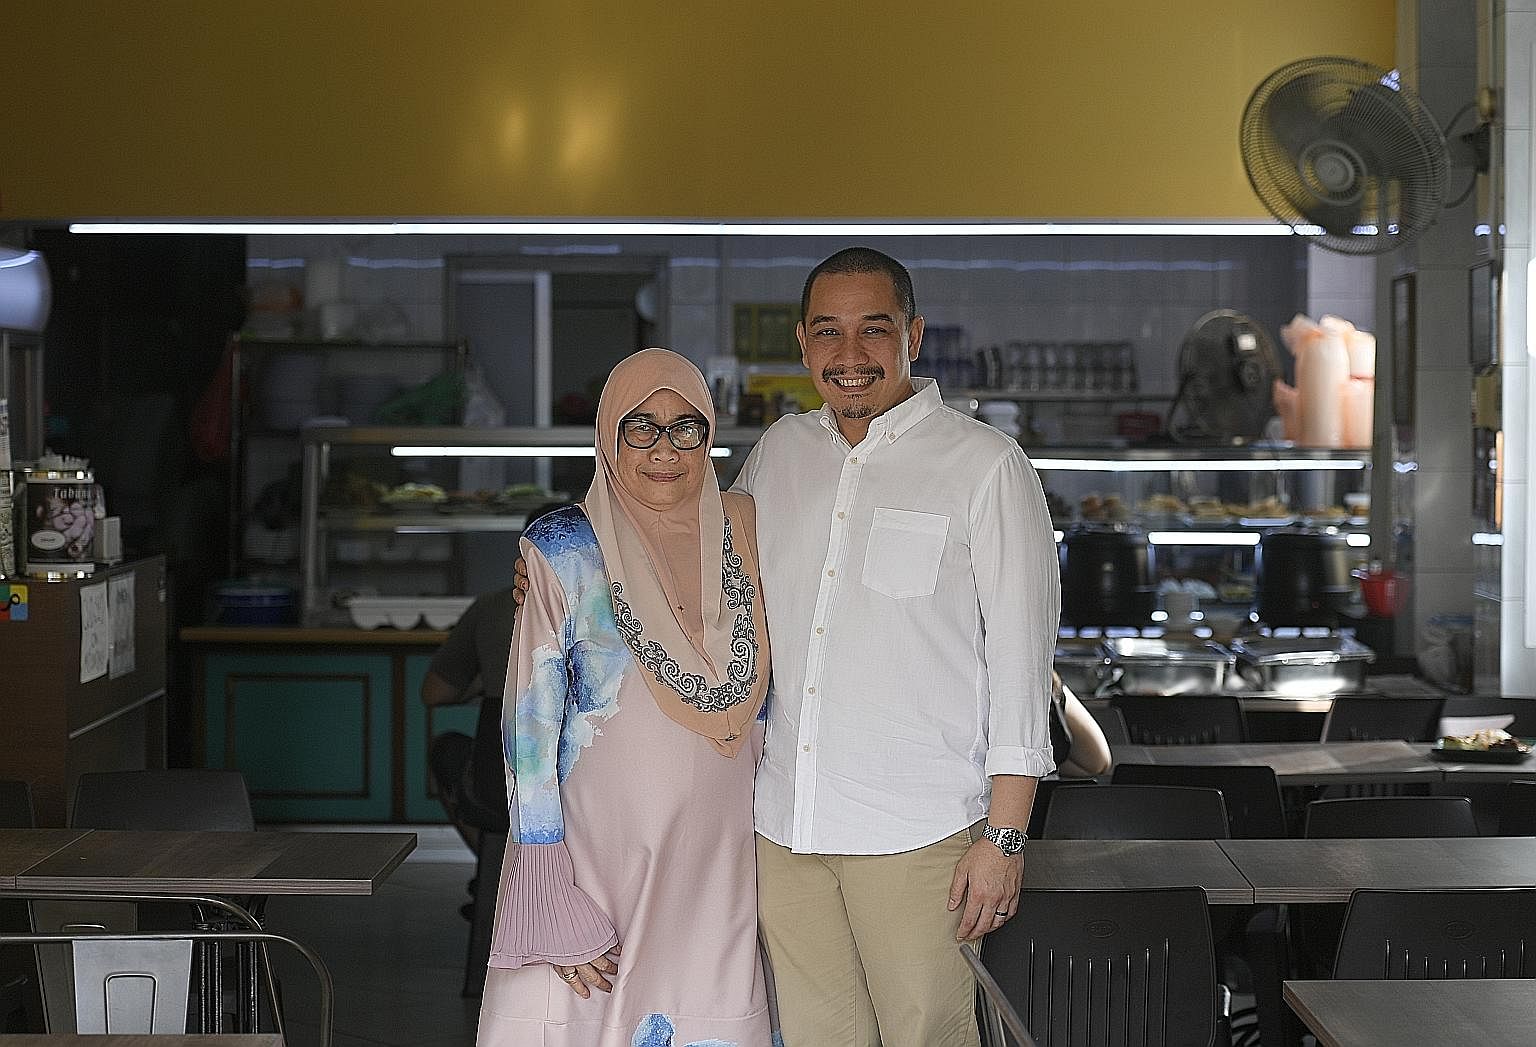 Ms Maryulis Bagindor Marlian (right), who helms Sabar Menanti in North Bridge Road, with her son Iszahar Tambunan, who helps out on Sundays. He is hoping to expand the business.